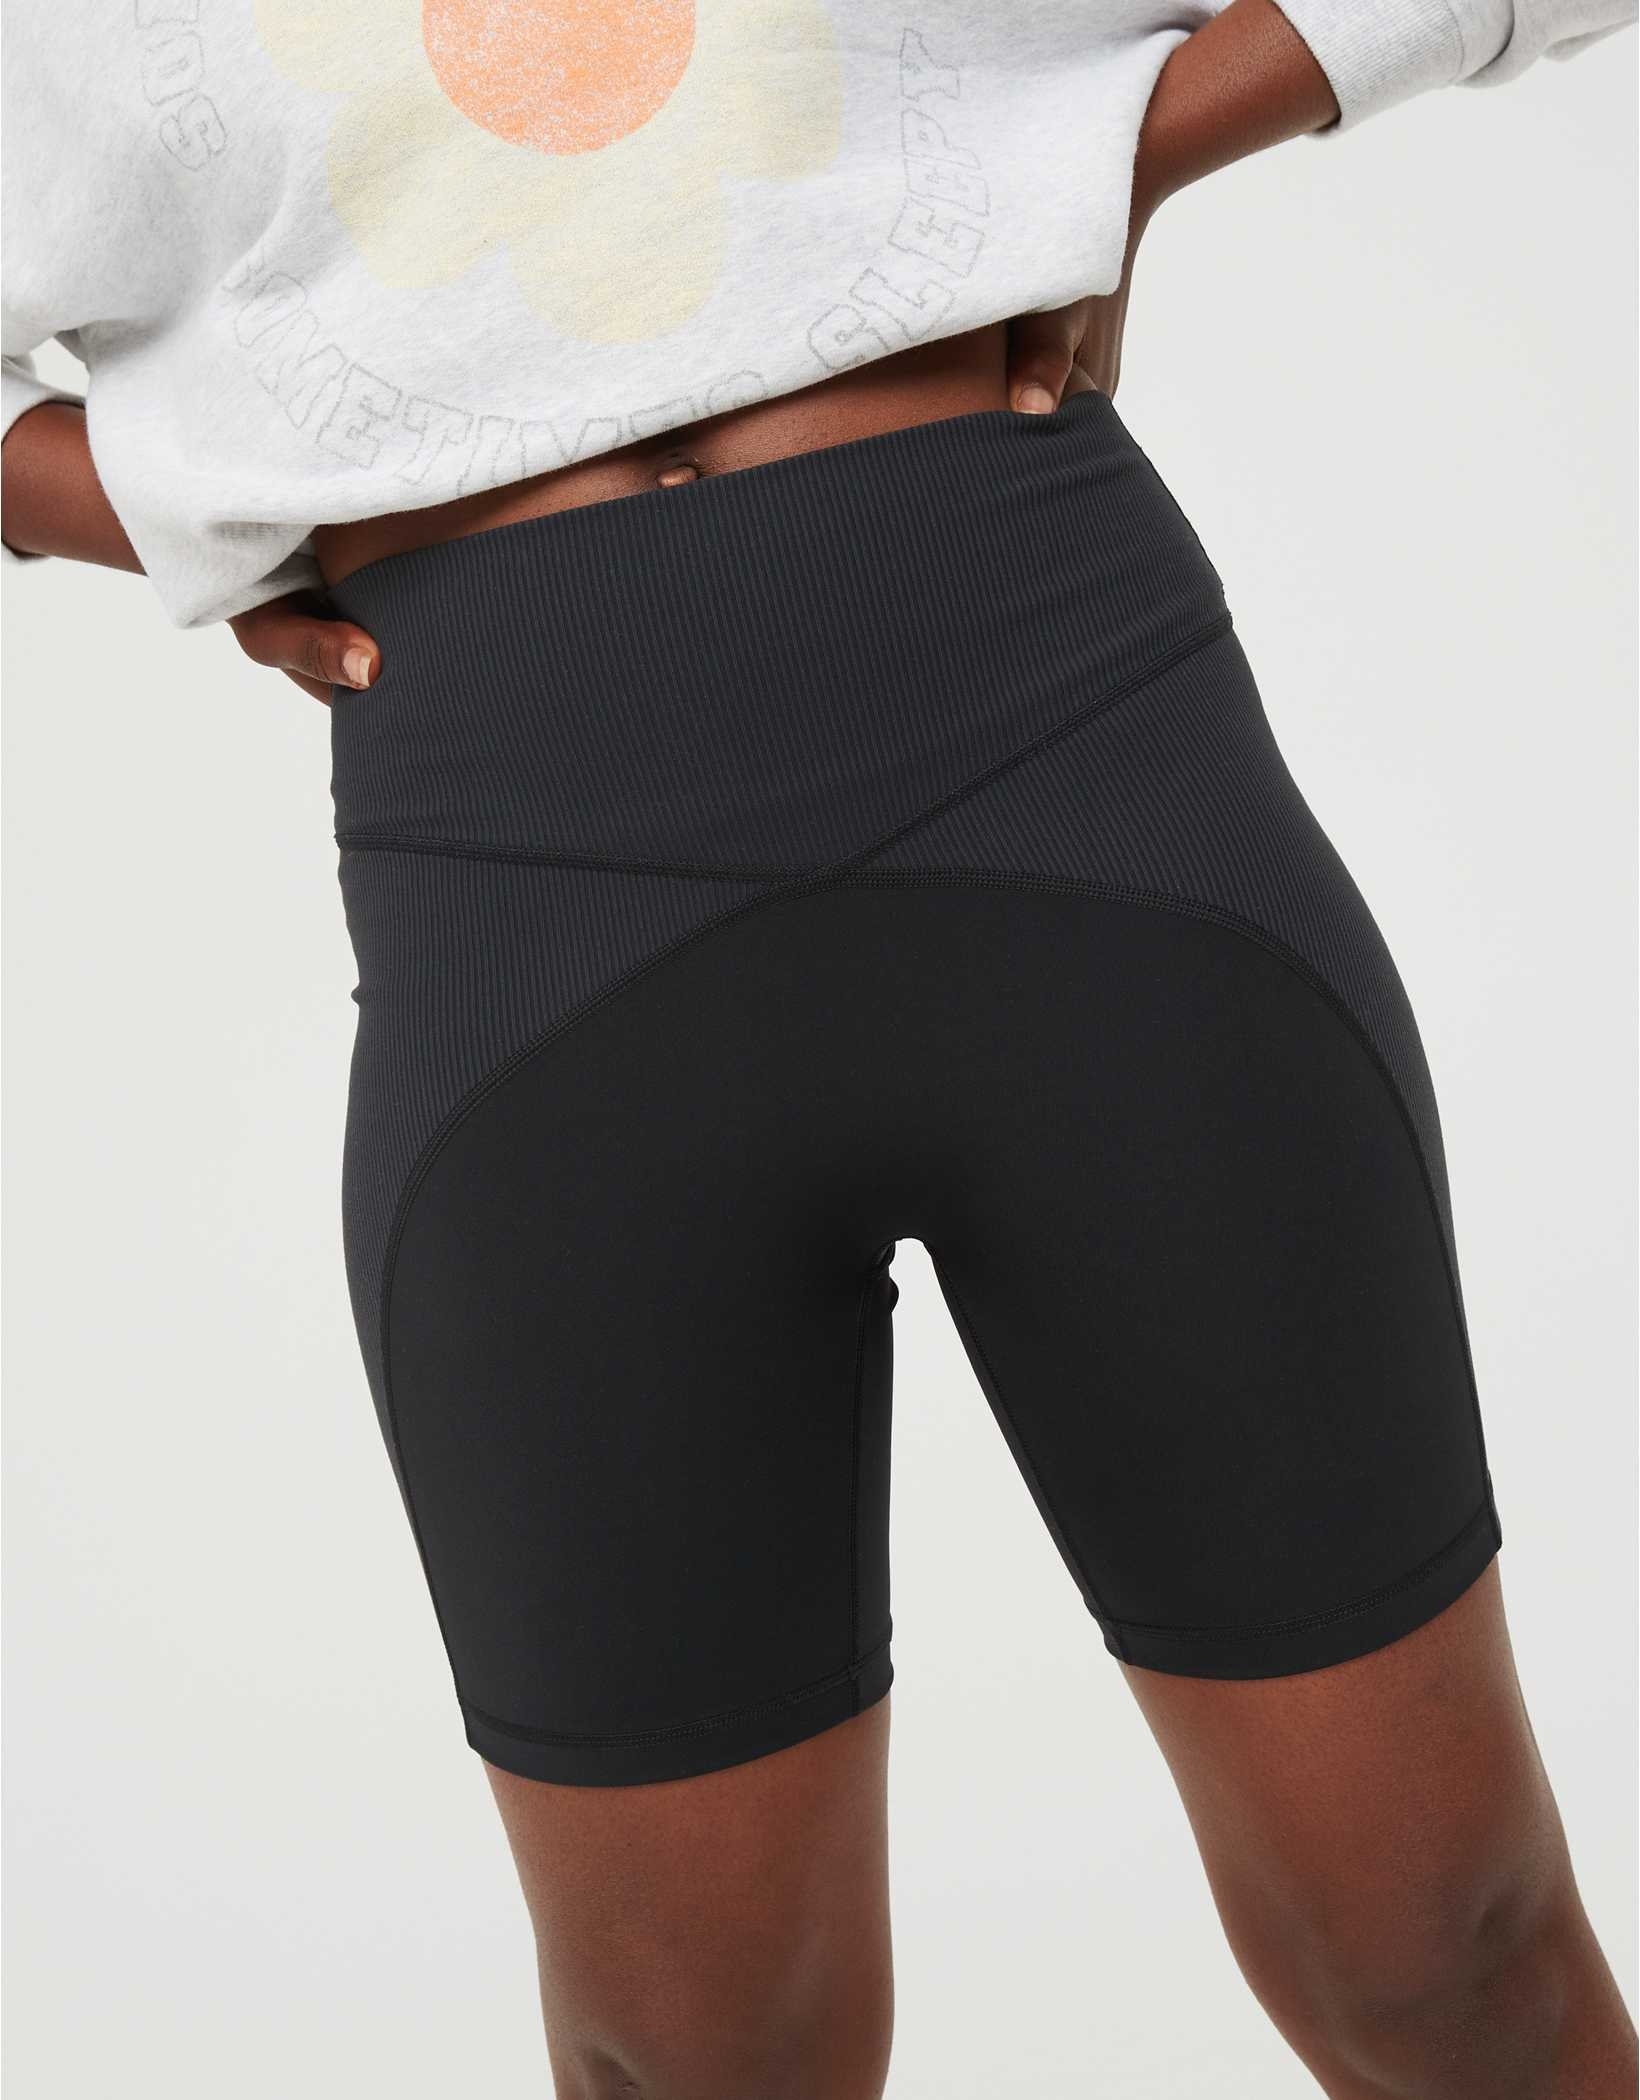 model wearing the black ribbed bike shorts and crop top